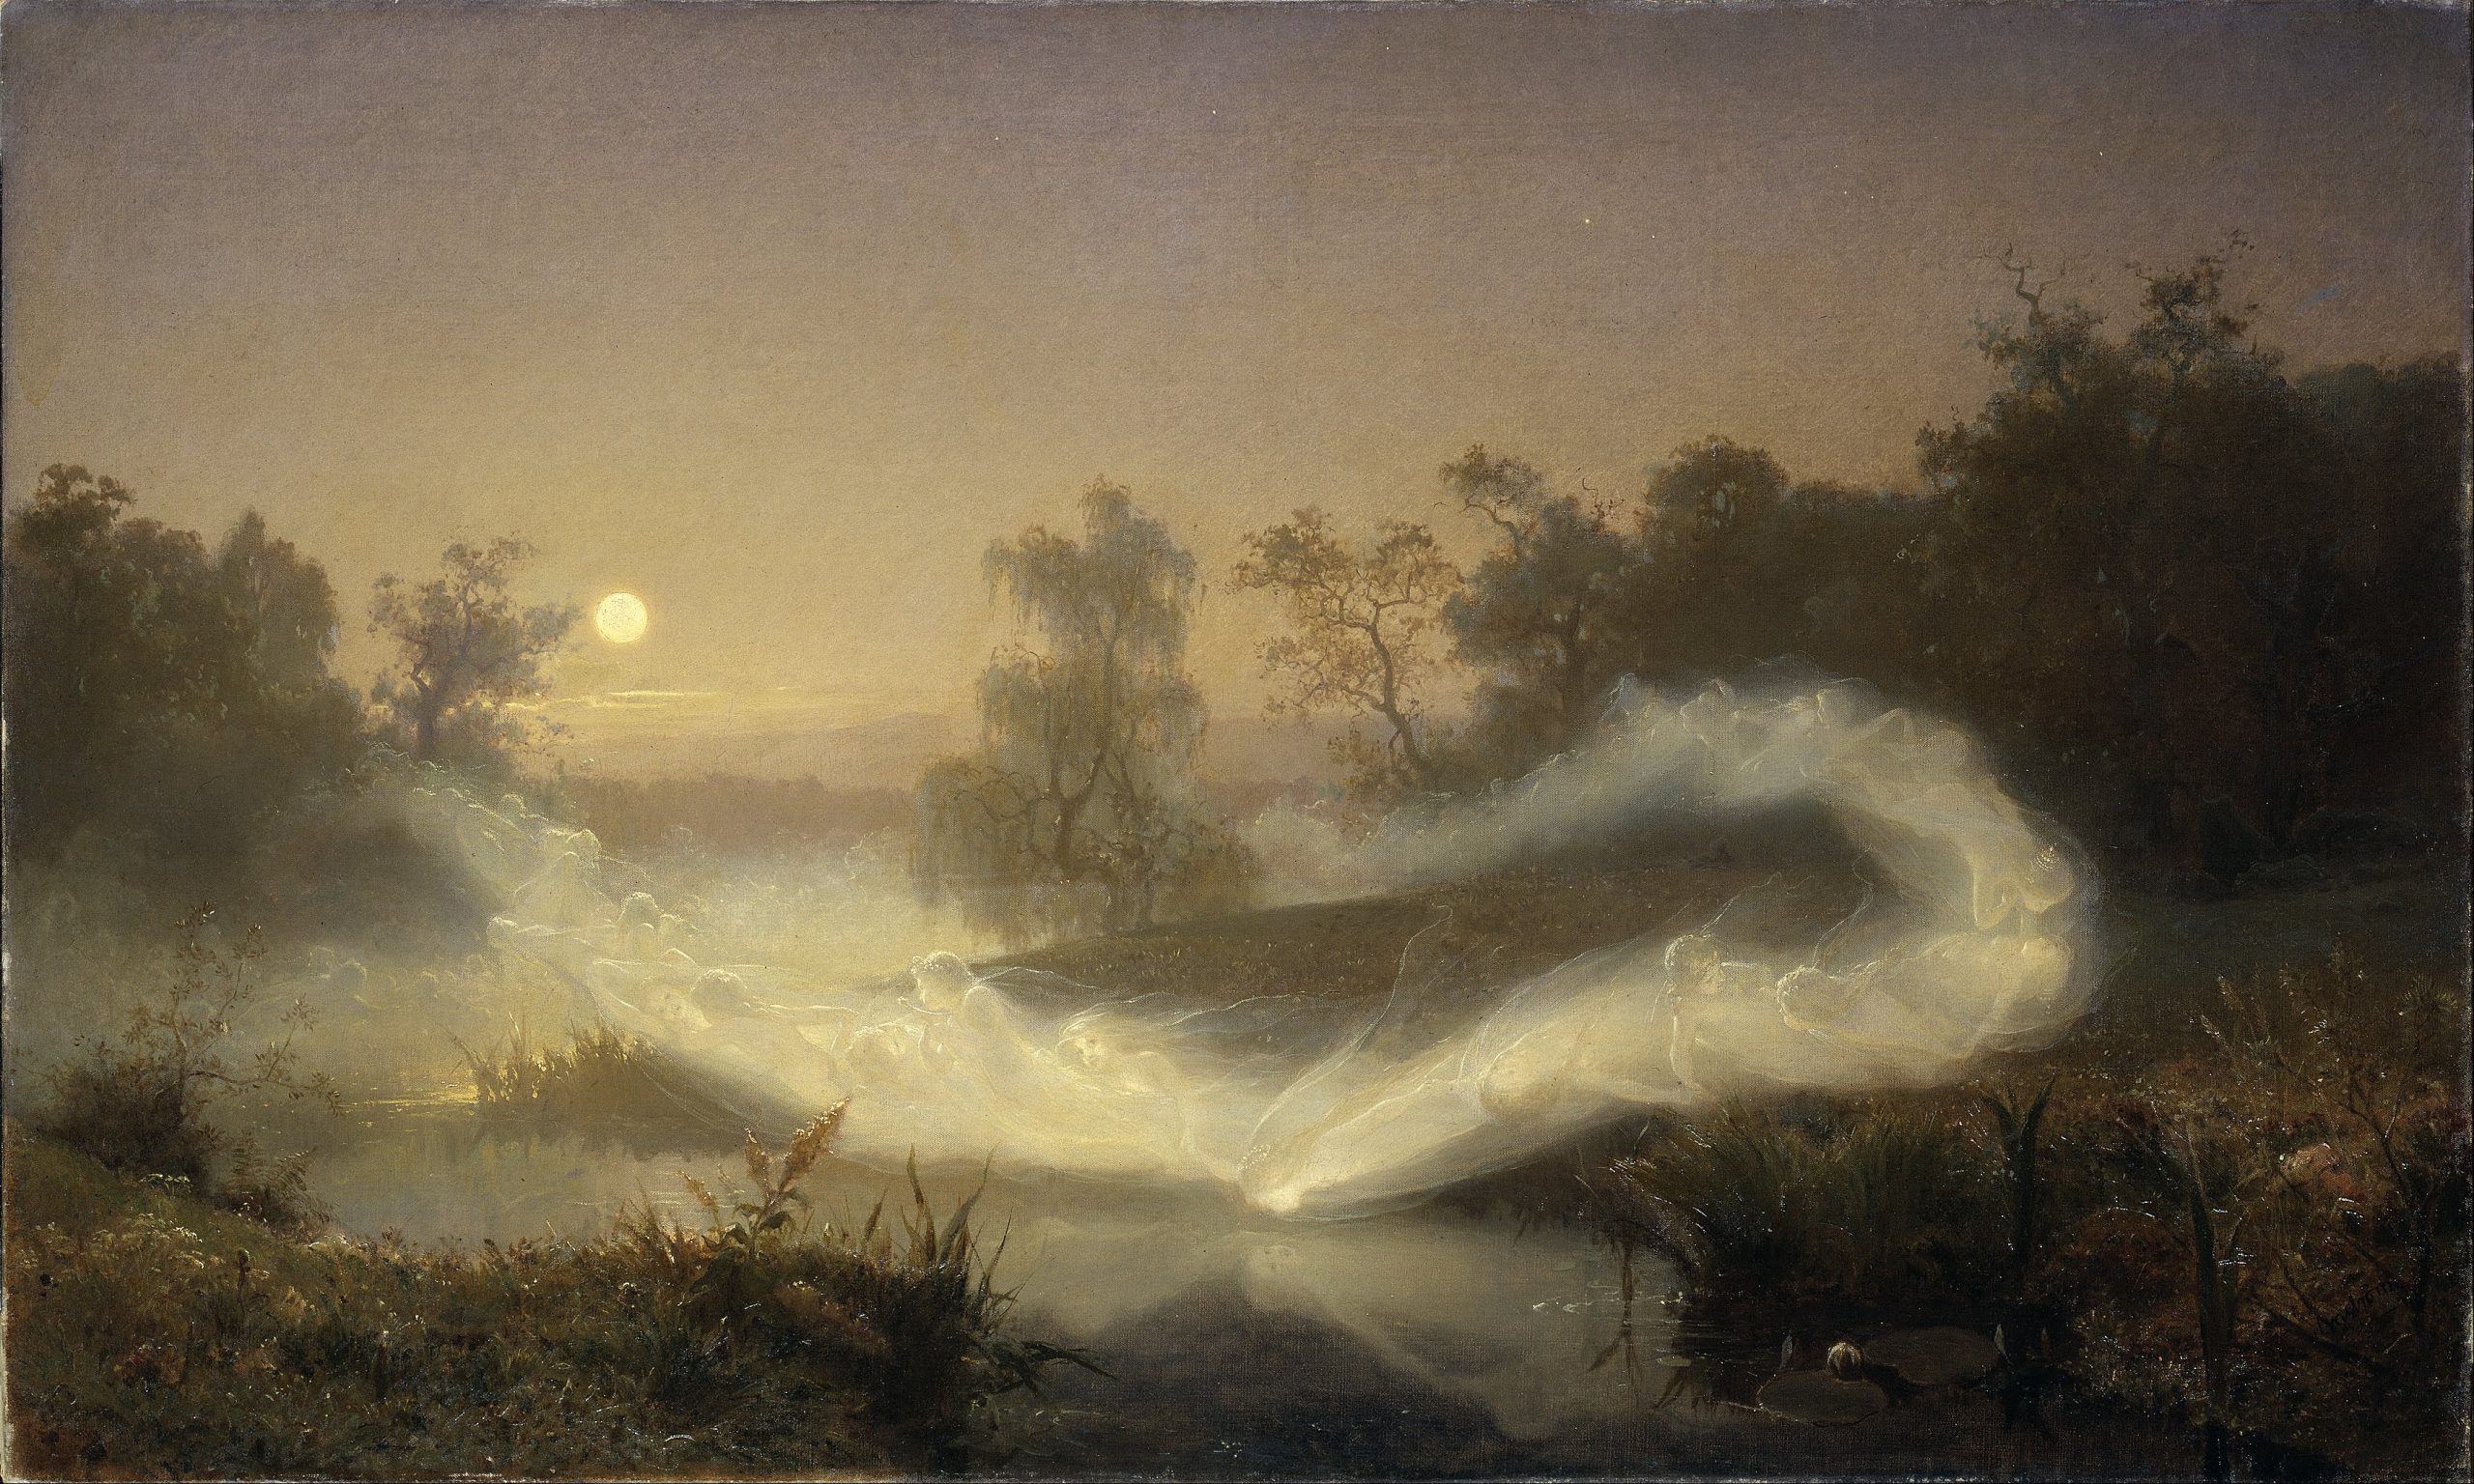 A glowing sky is lit by the scene of fairies dancing over water at dusk.